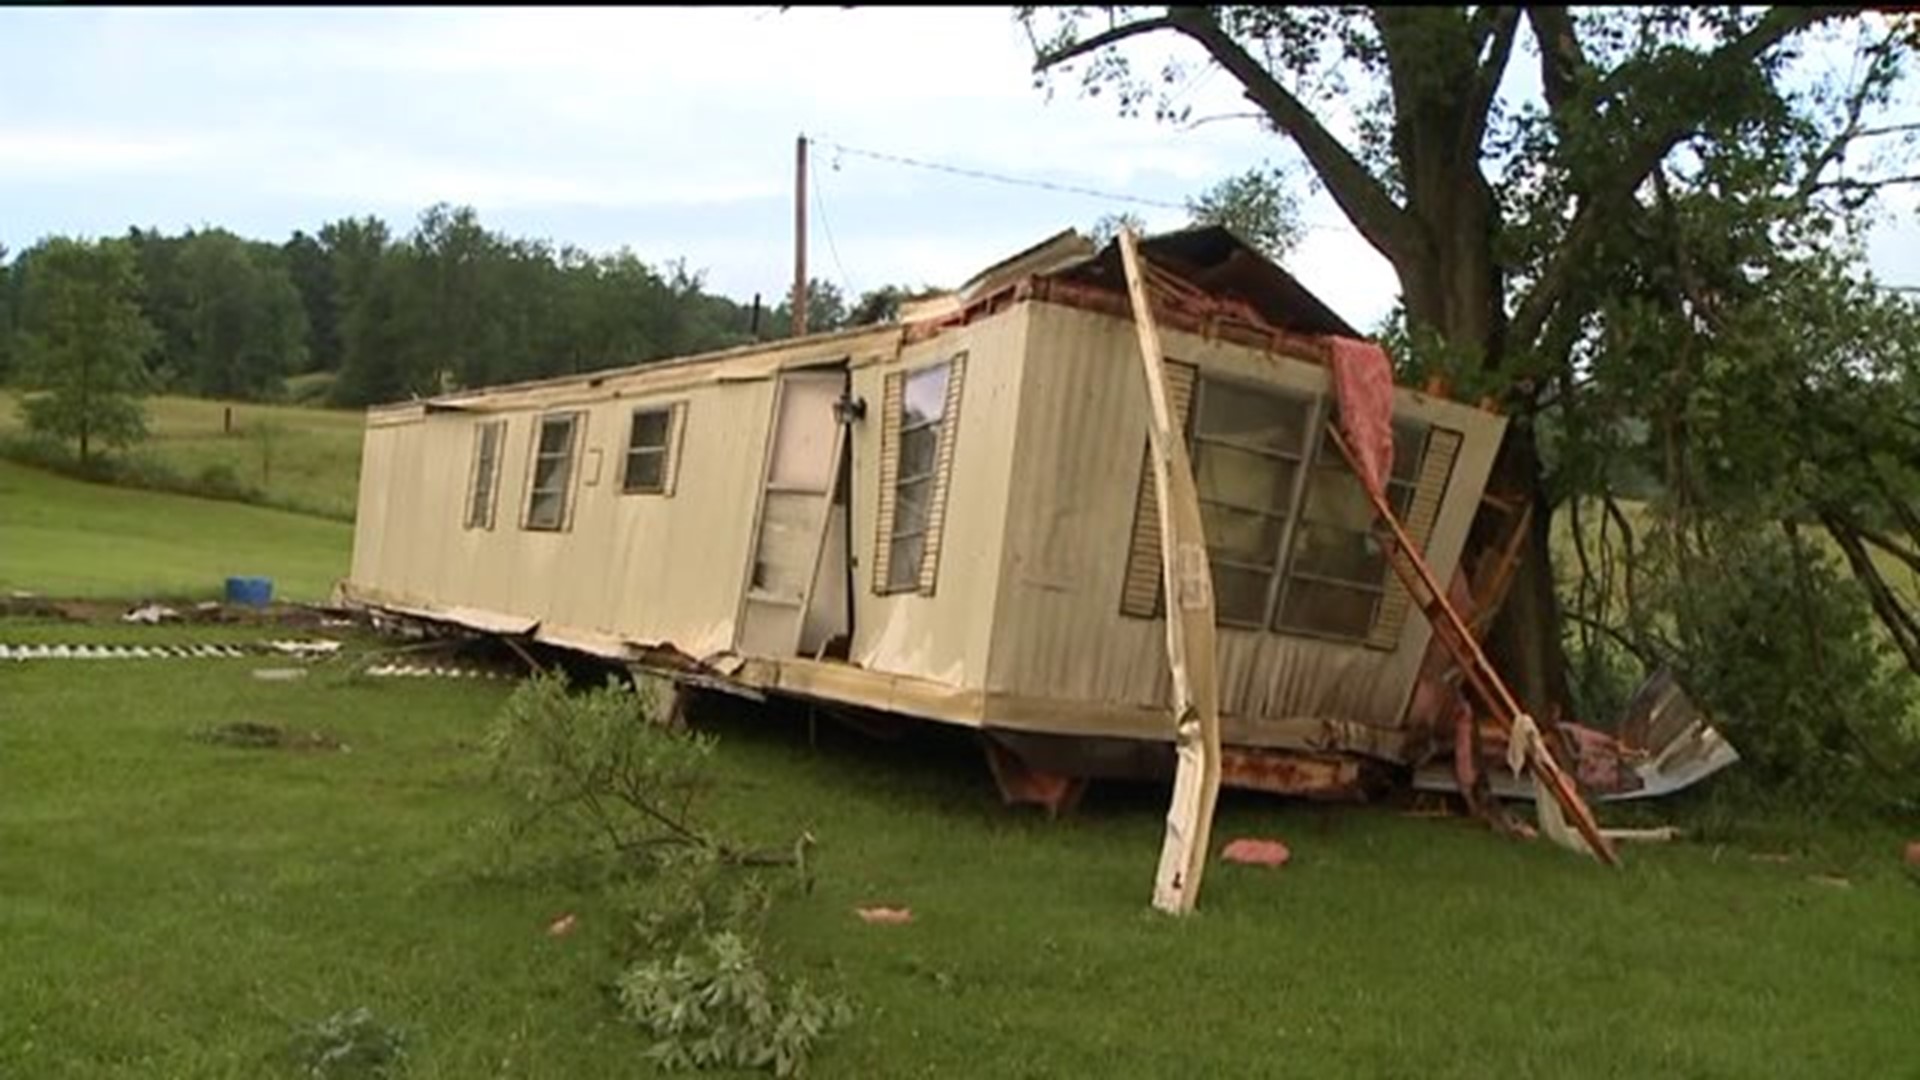 Twister Confirmed In Bradford County, Cleanup Begins